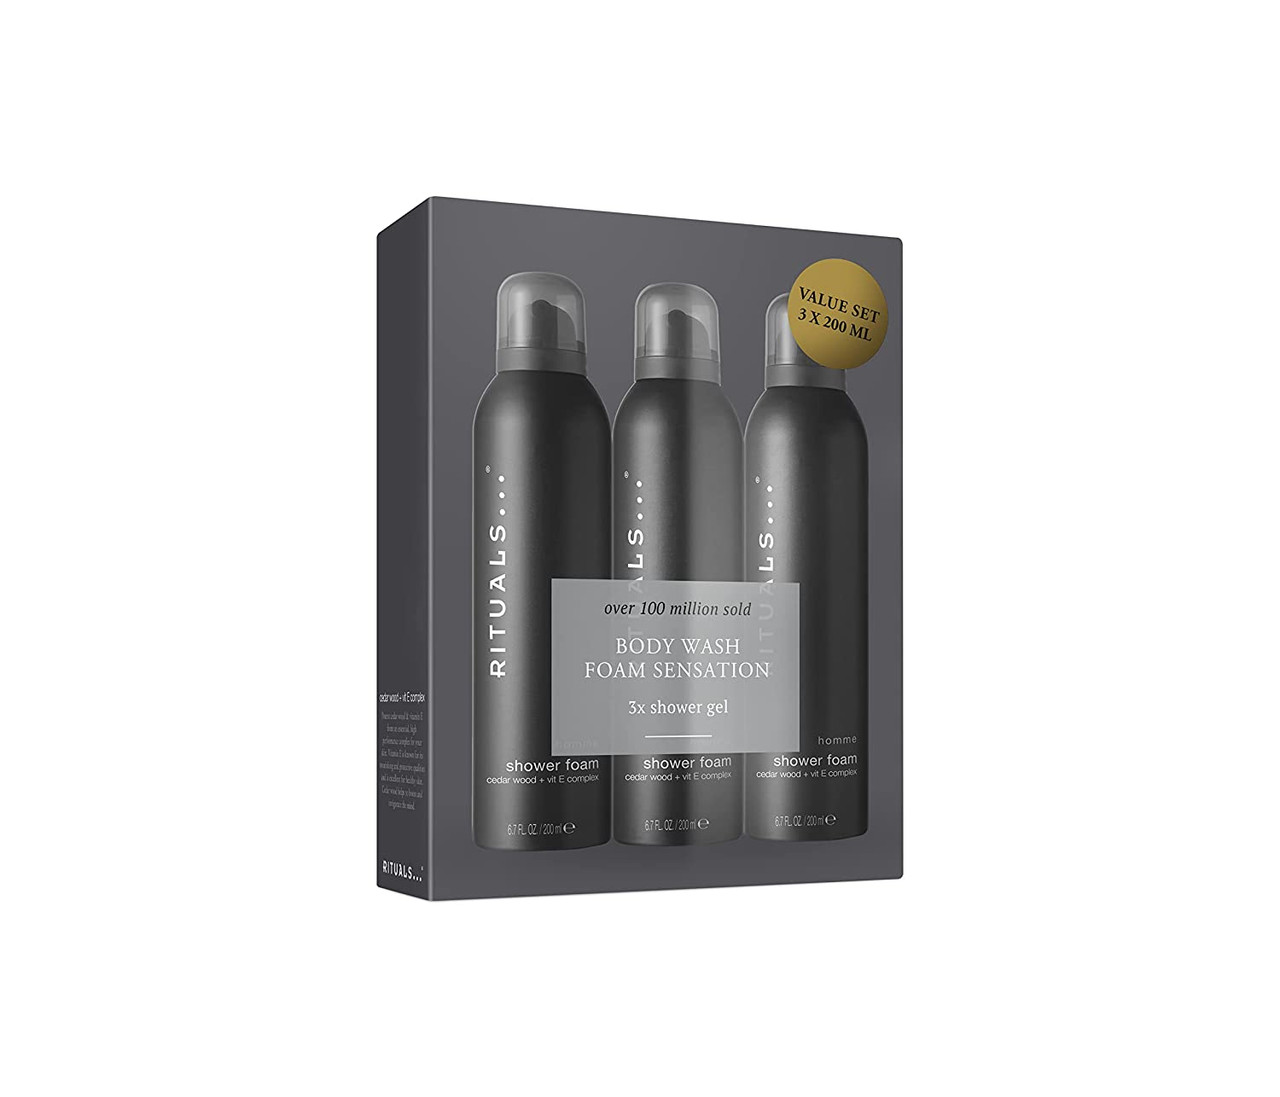 RITUALS Gift Set for Men from The Homme Collection - Shower Gel, 2-in-1  Shampoo & Body Wash, Body Lotion, Eau de Parfum - with Cedar Wood & Vitamin  E Complex - Medium 